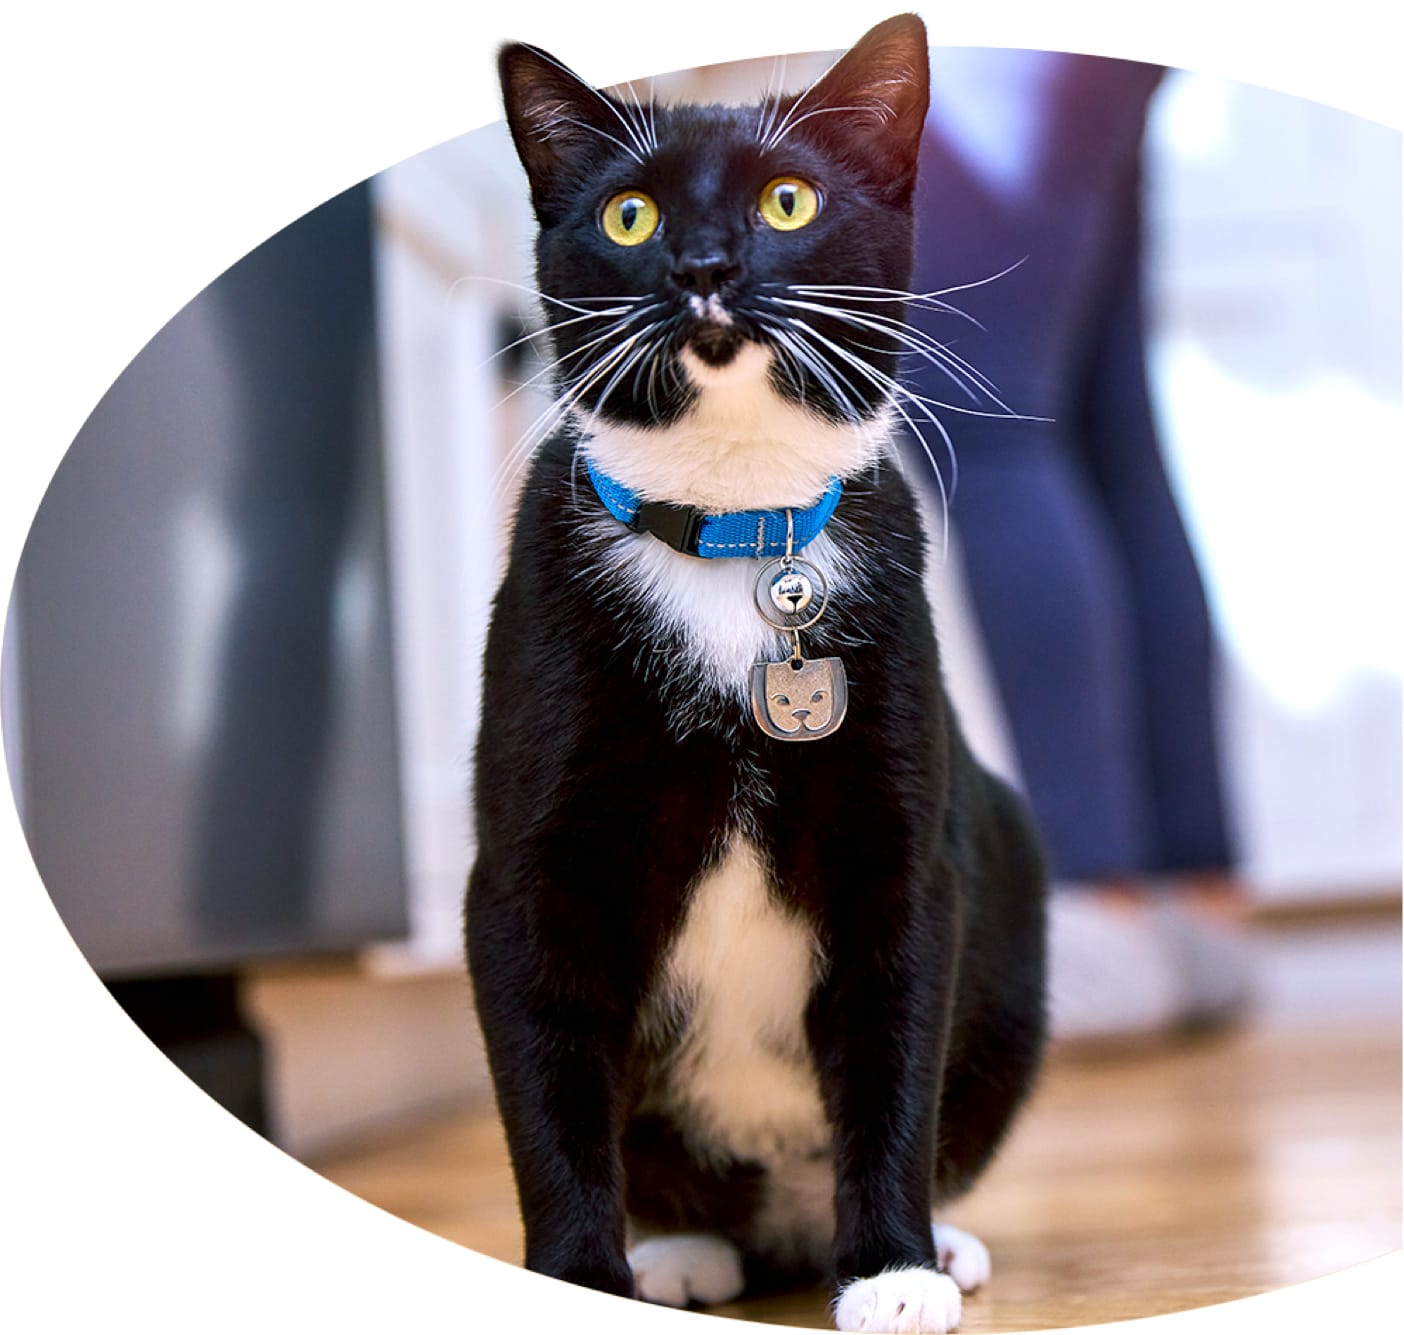 A Tuxedo cat with a blue a collar waits expectedly for your next move.